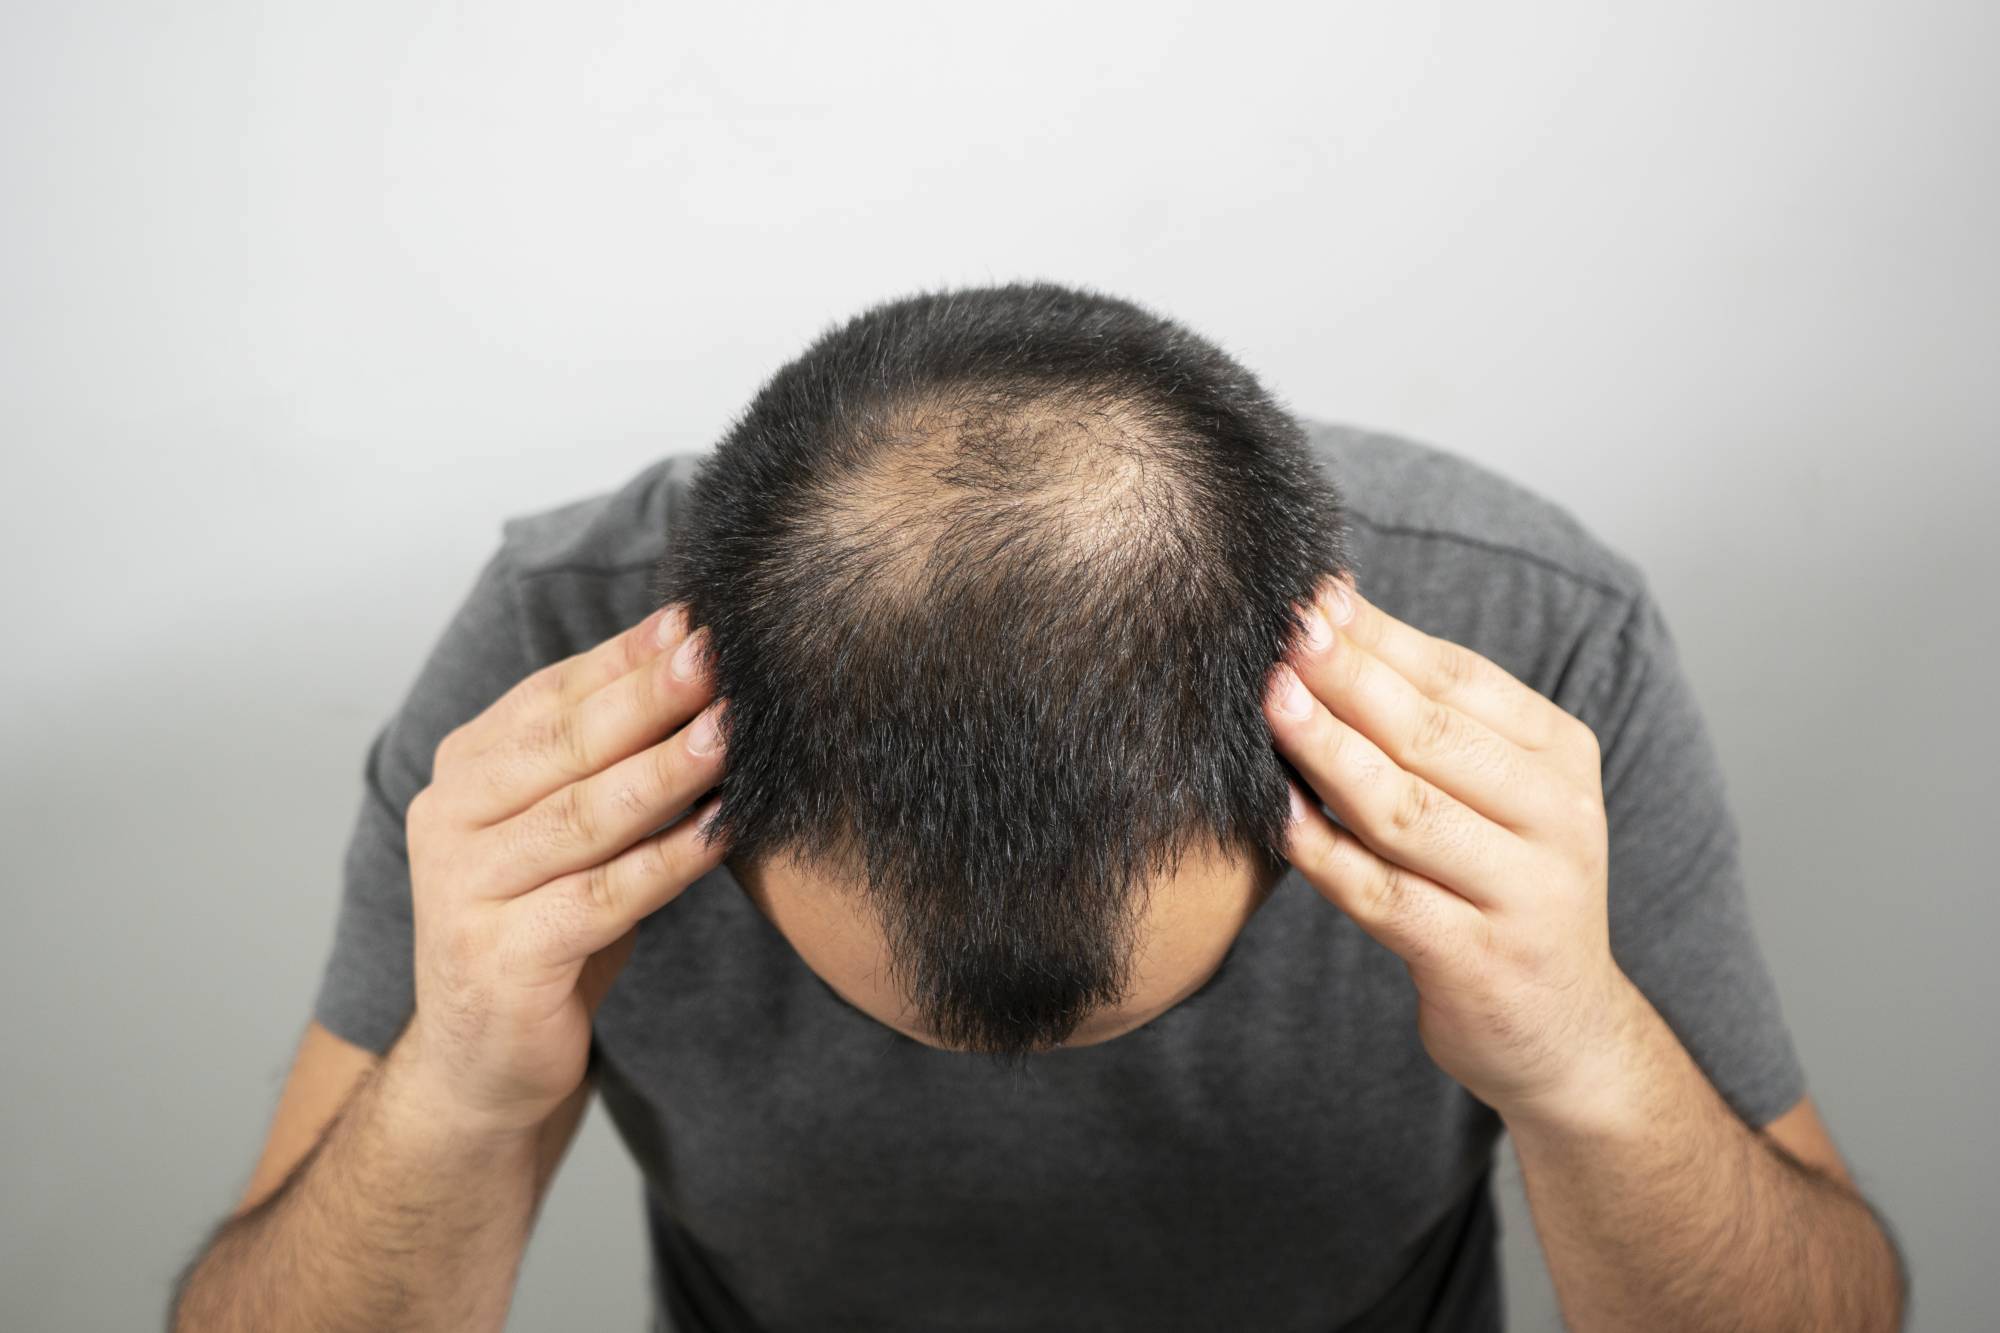 One of the major issues that men and women face nowadays is hair loss. Which vitamins could help restore your hair?